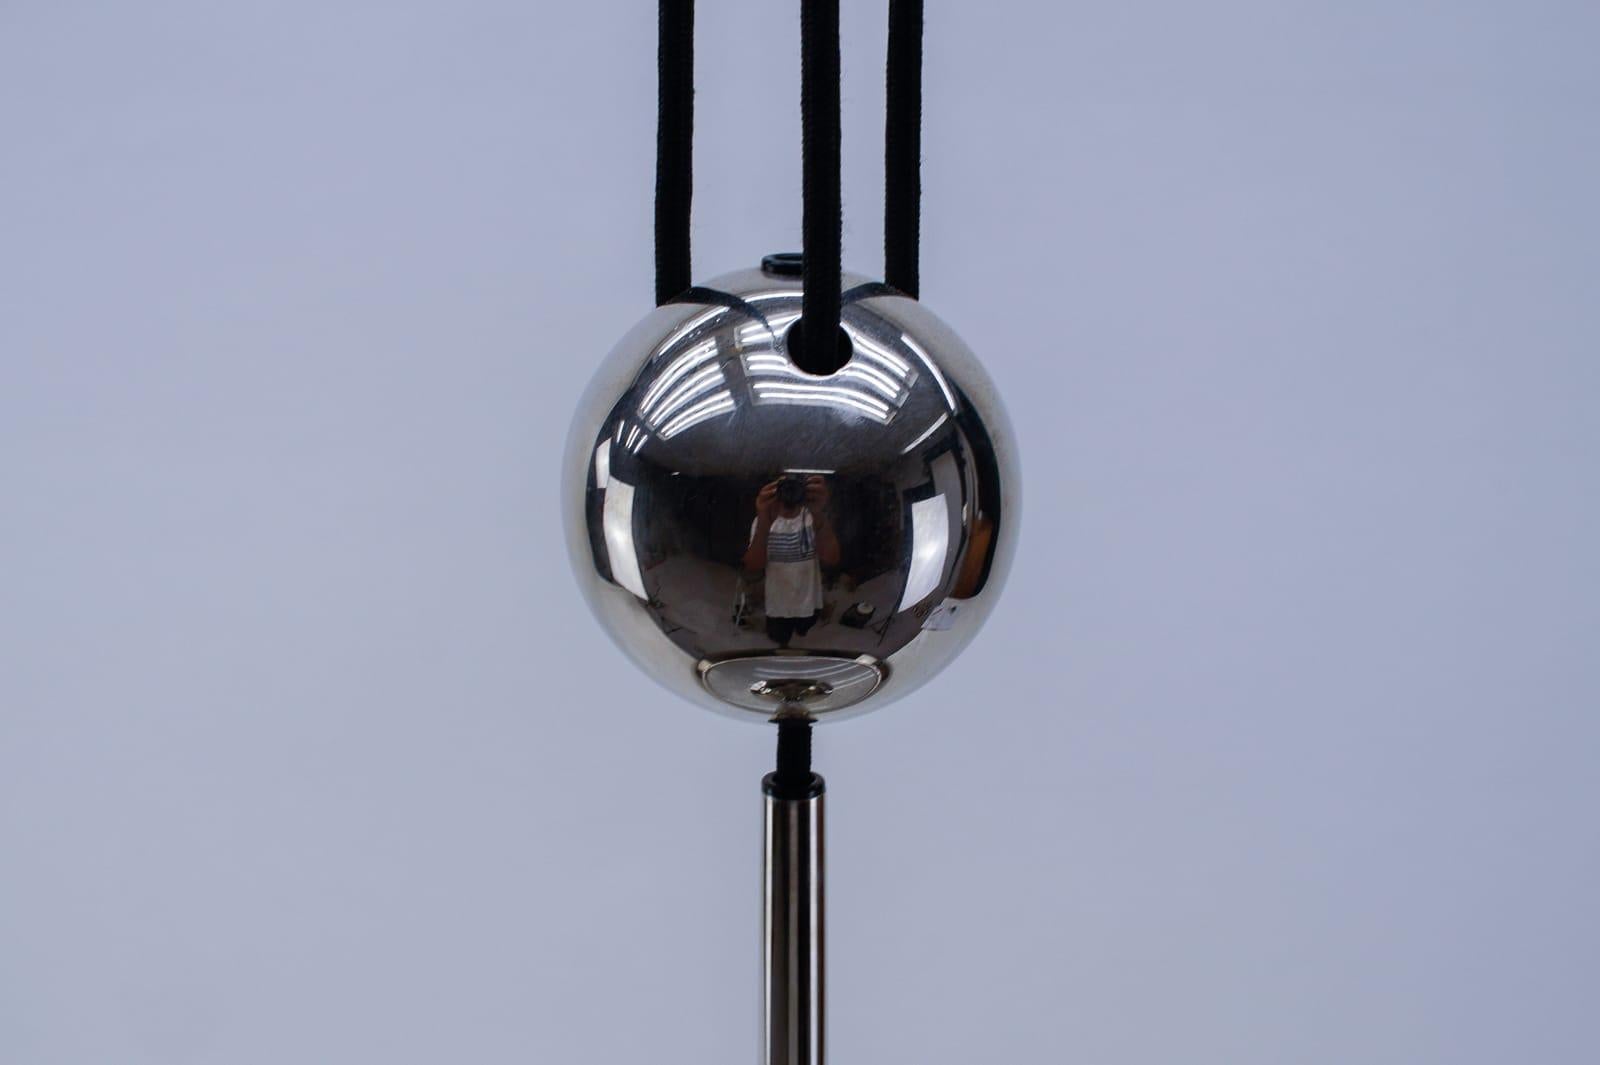 Florian Schulz Nickel Plated Pendant Lamp with Counterweight, Germany, 1970s For Sale 8